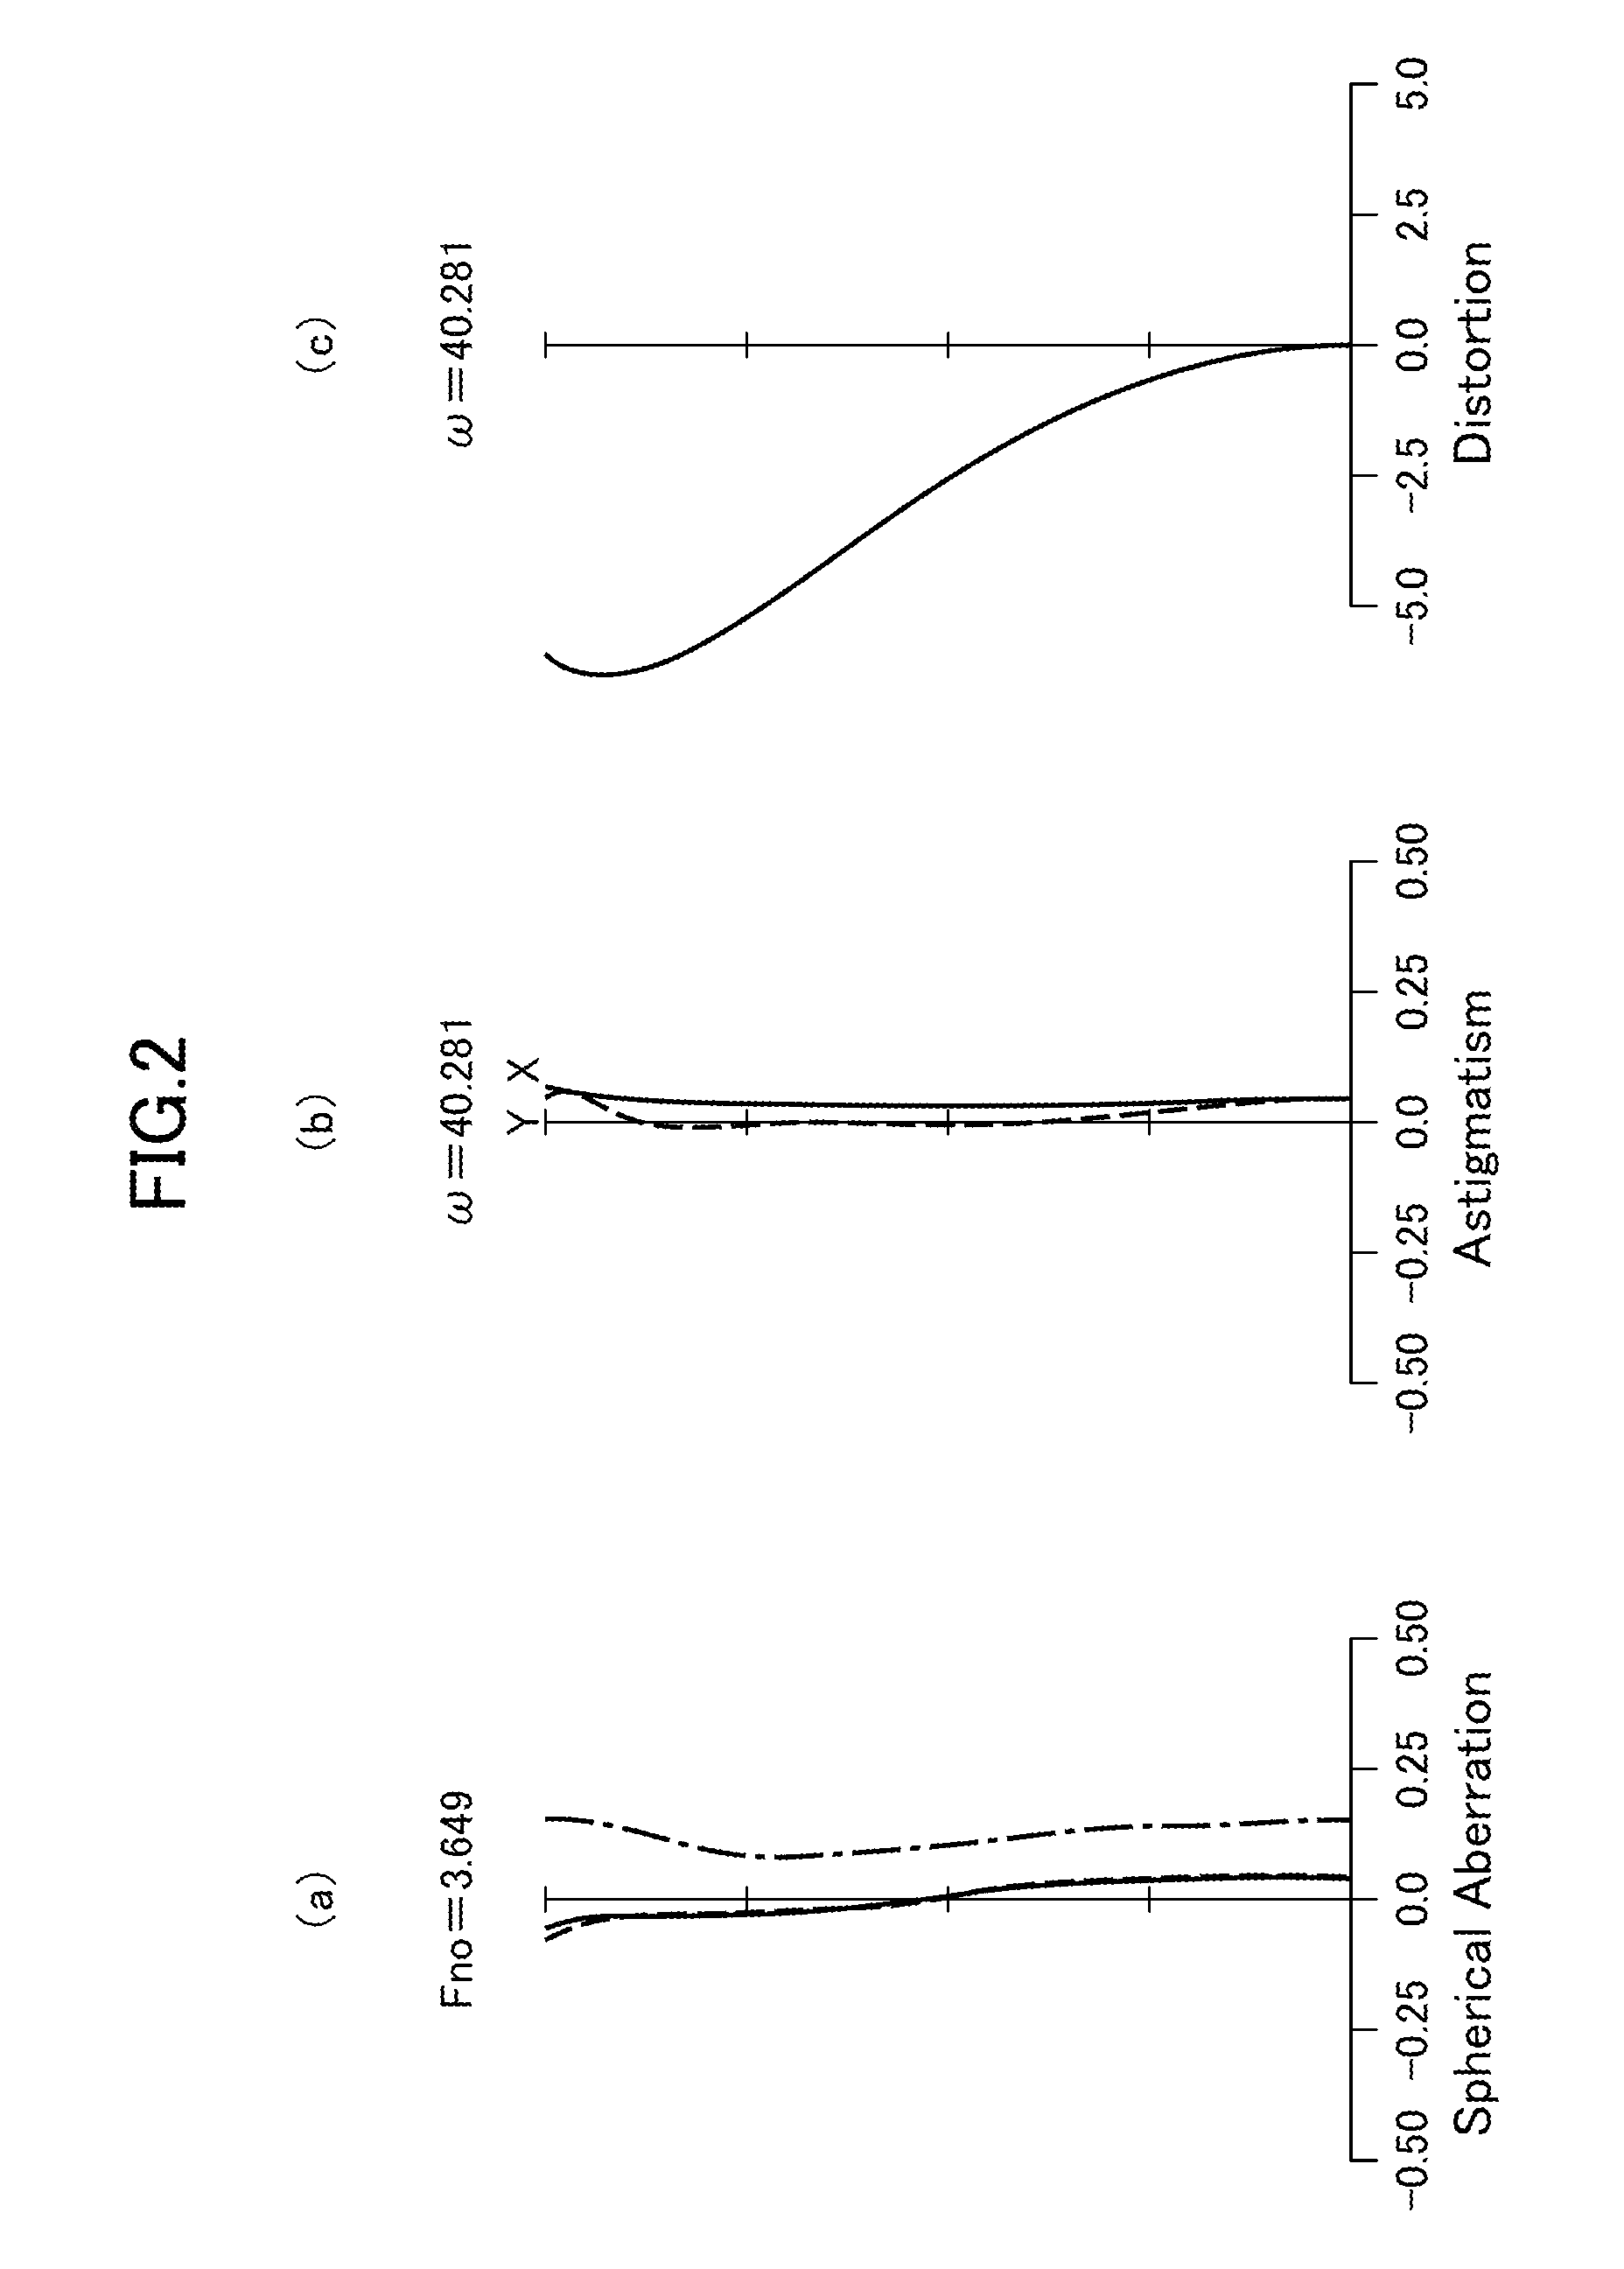 Zoom lens, and imaging apparatus equipped with same